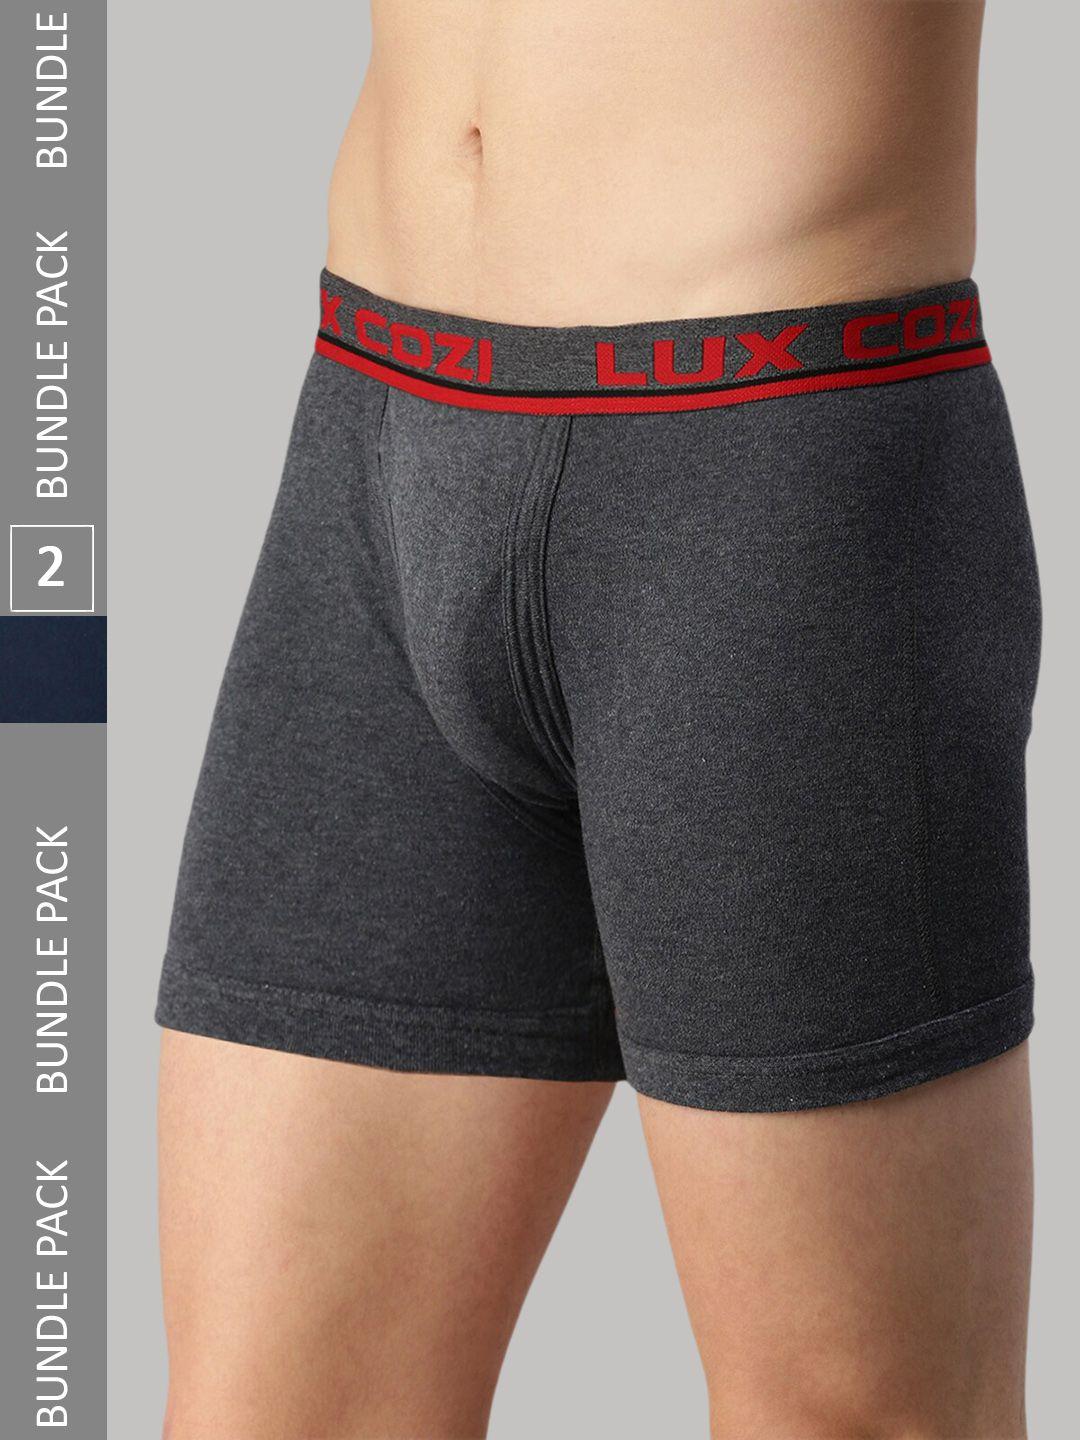 lux cozi men pack of 2 pure cotton outer elastic trunks